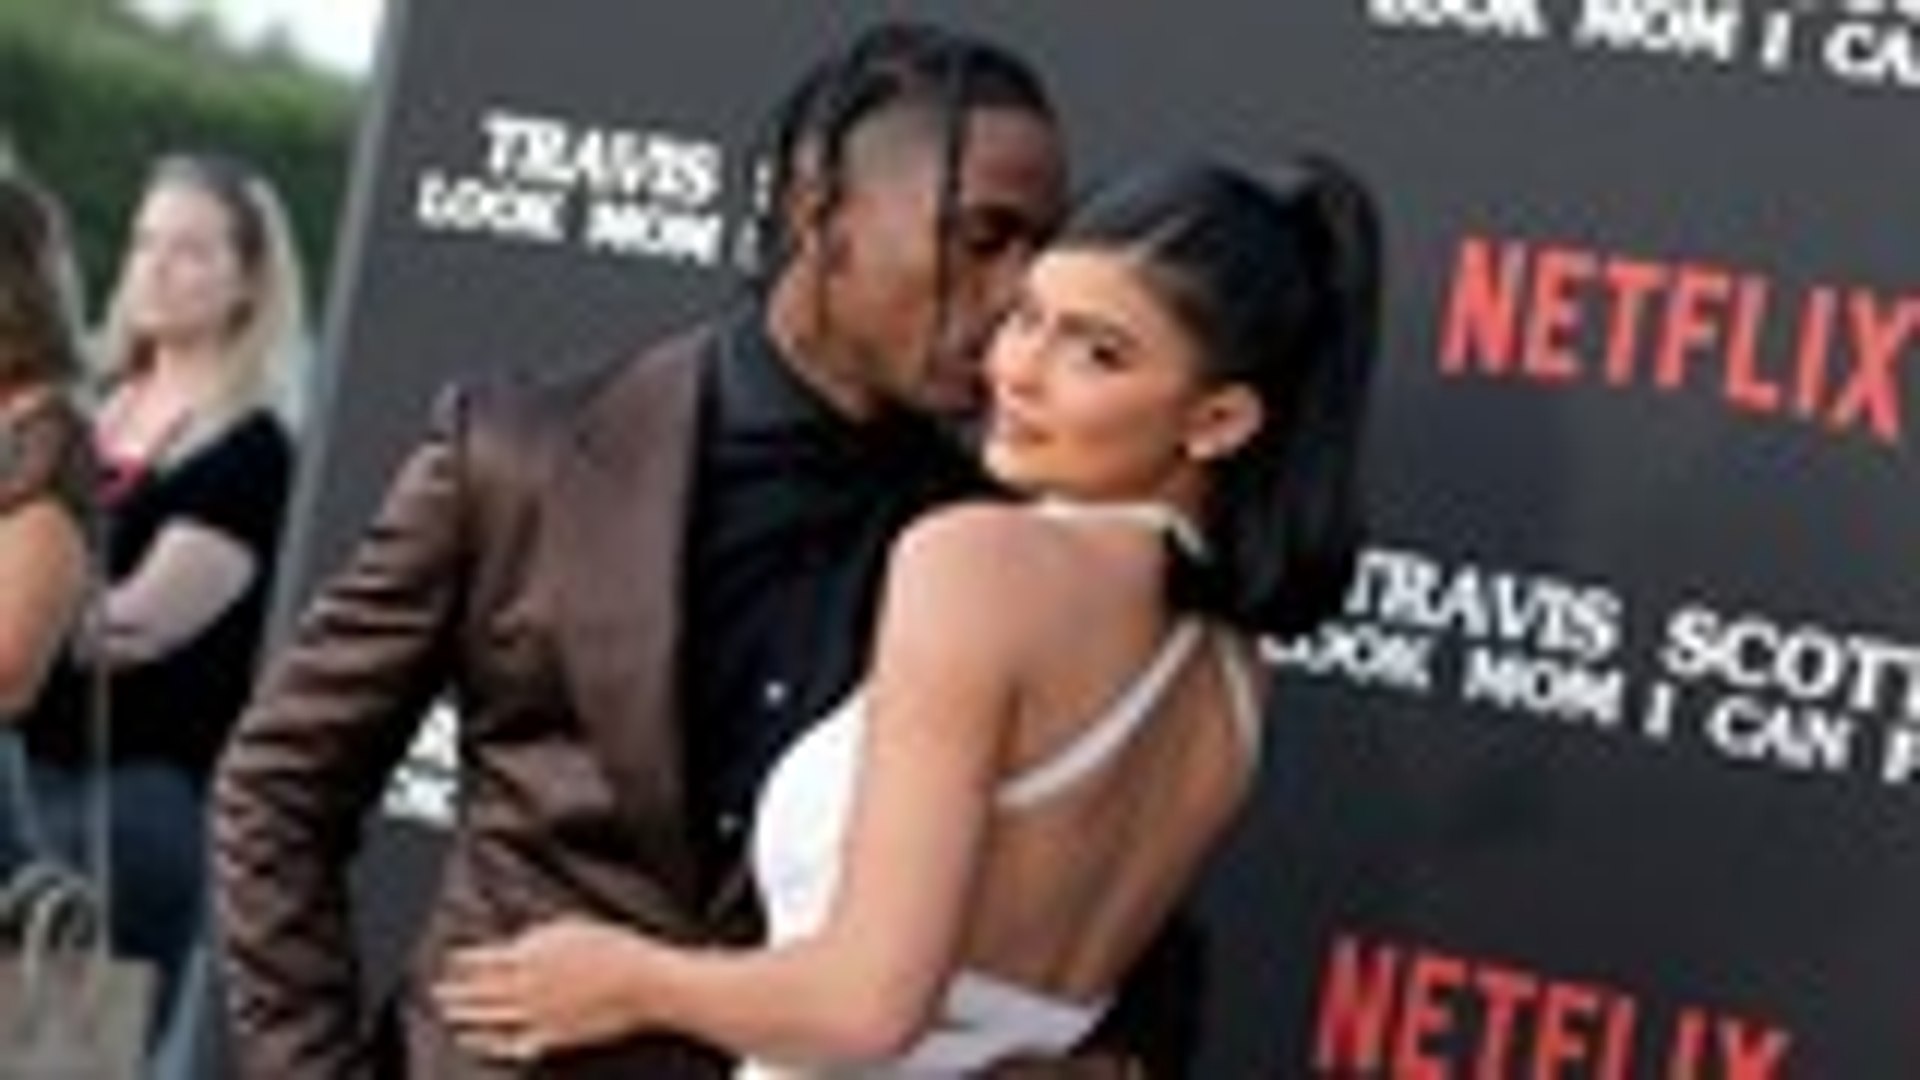 Travis Scott and Kylie Jenner's Daughter Makes Red Carpet Debut at Netflix Documentary Premiere